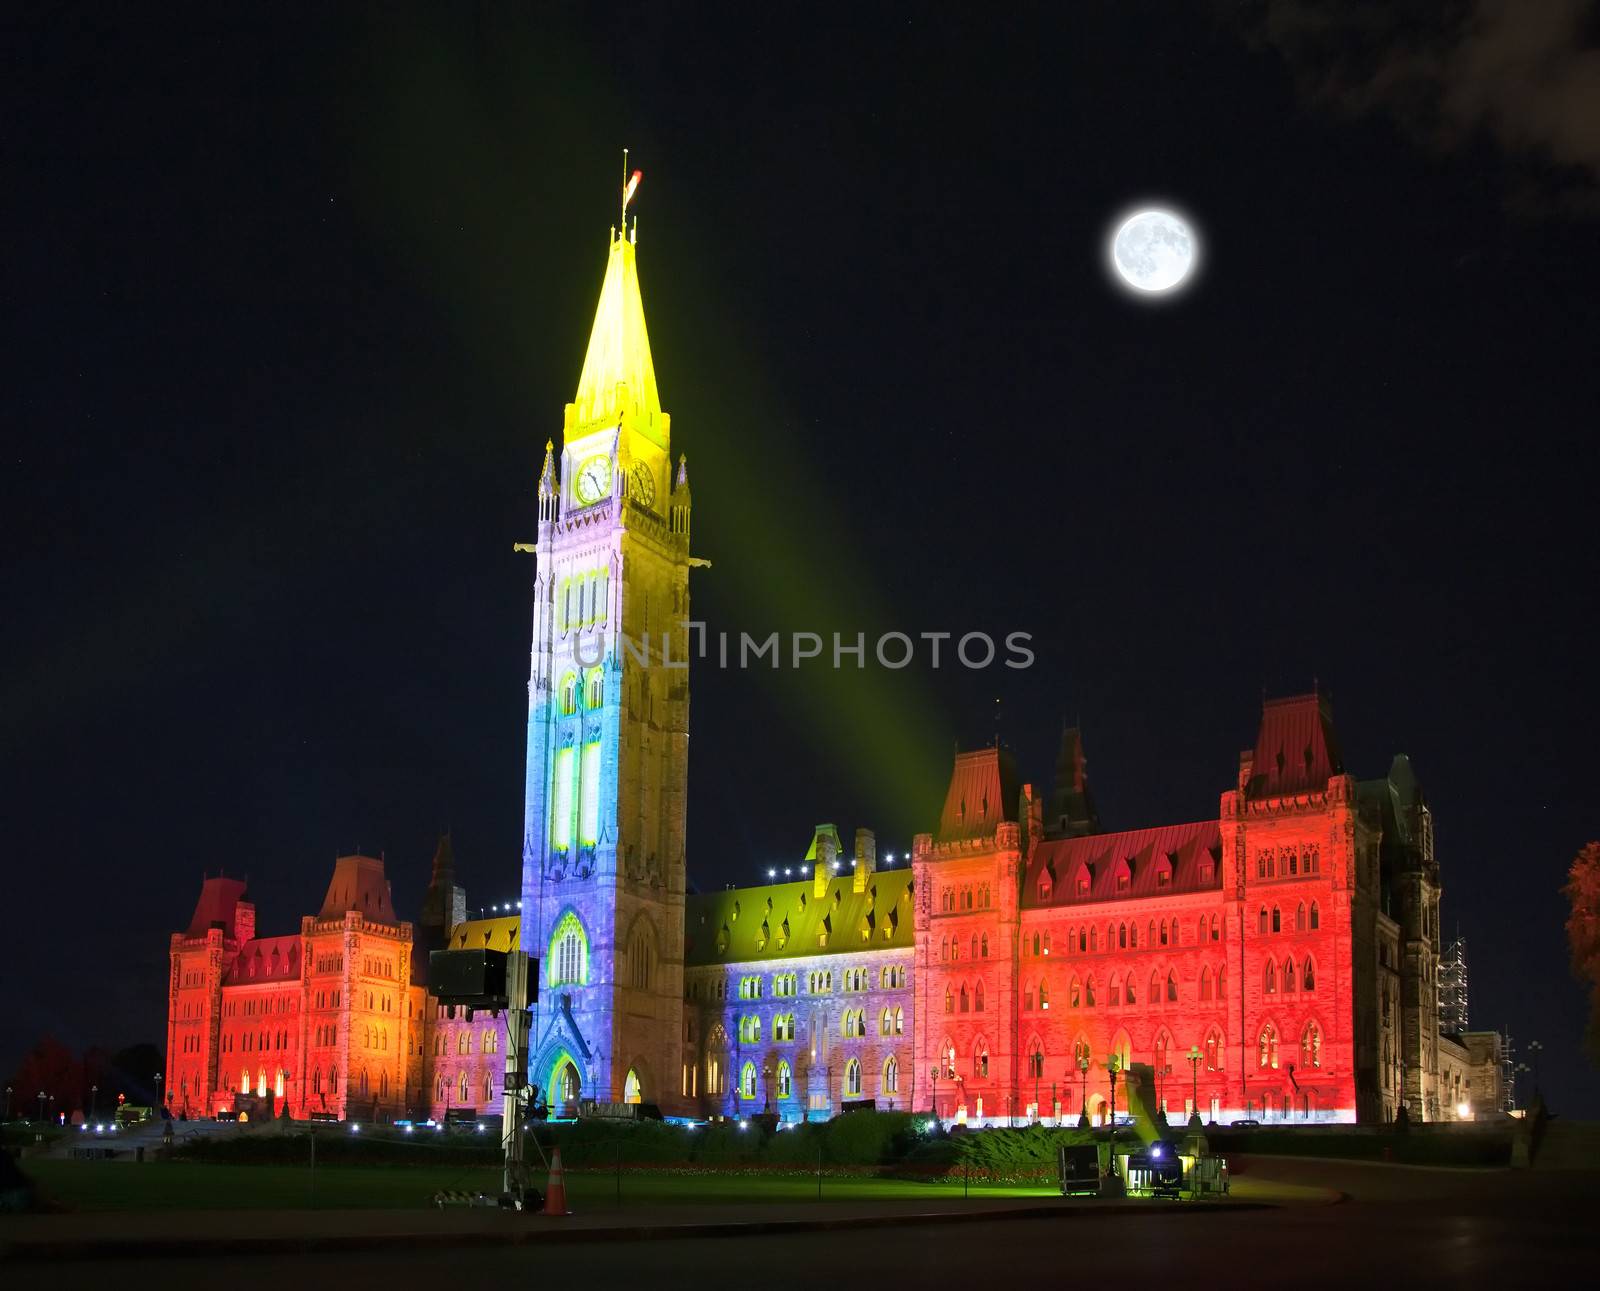 The illumination of the Canadian House of Parliament at night by gary718